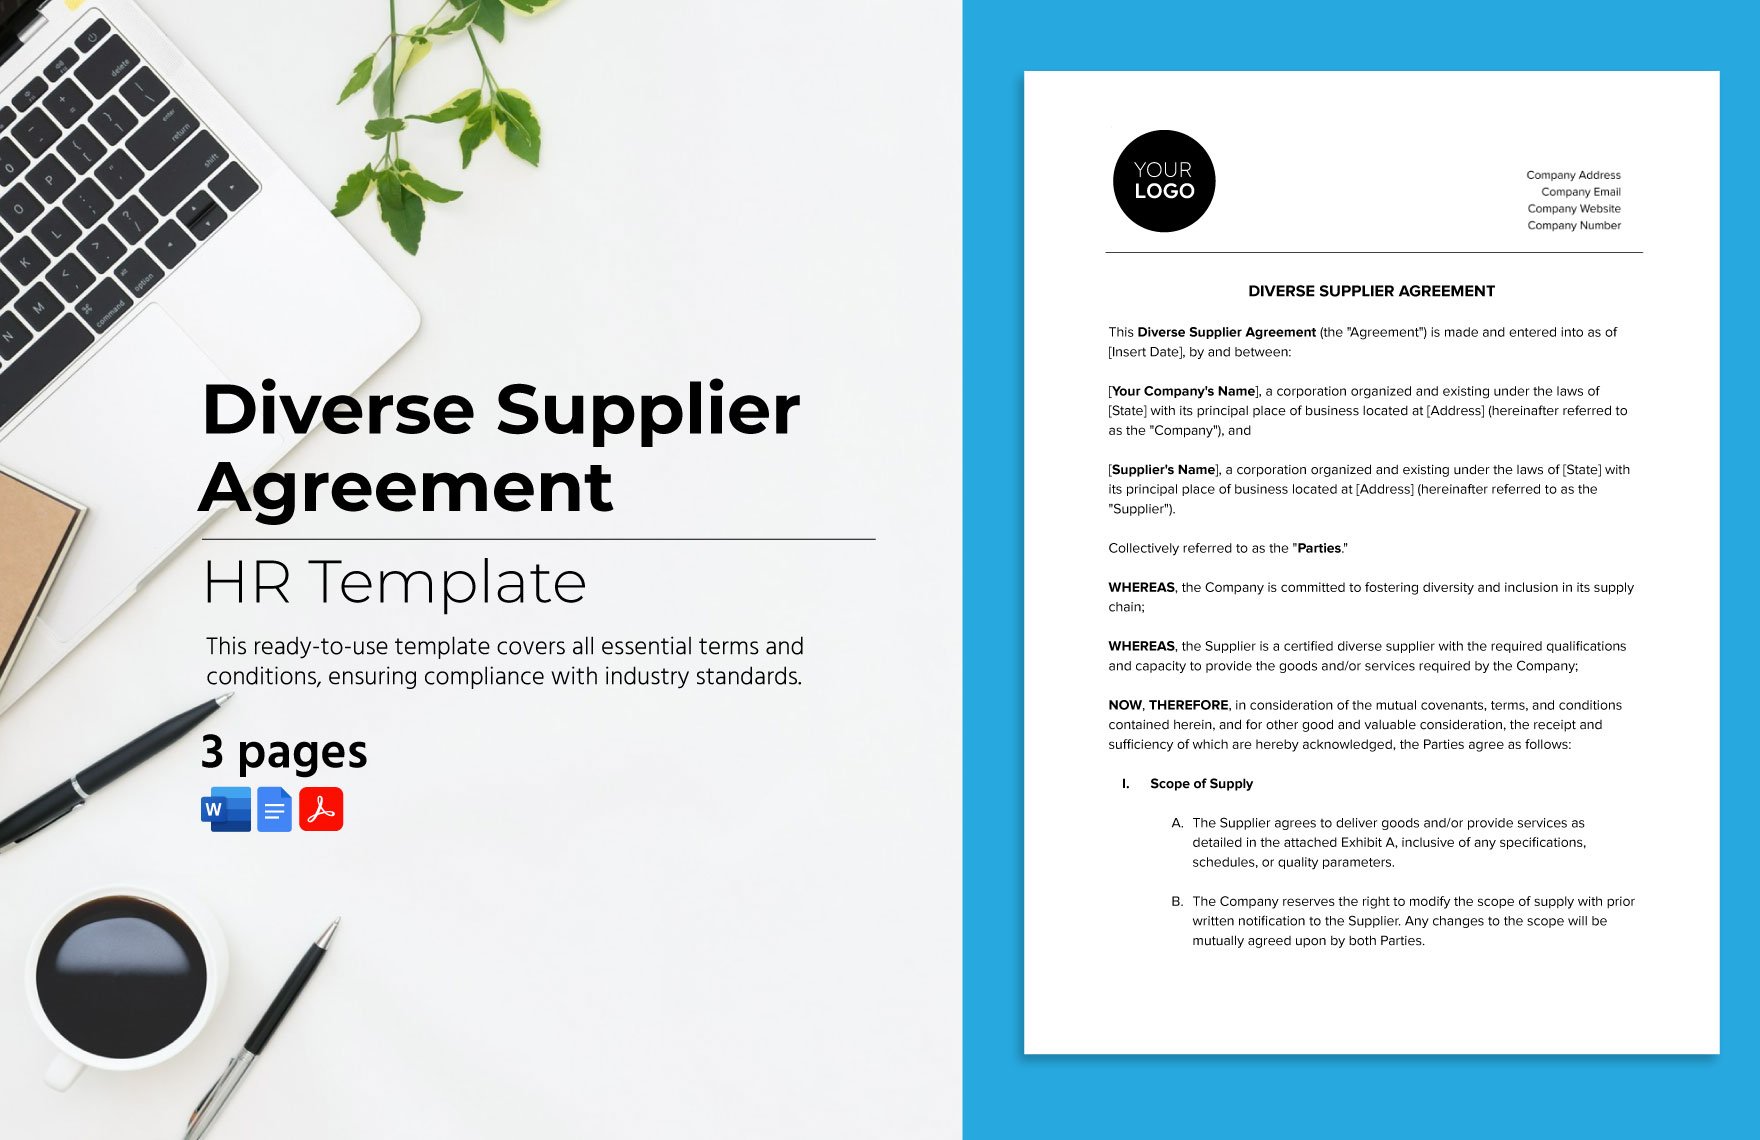 Diverse Supplier Agreement HR Template in Word, Google Docs, PDF